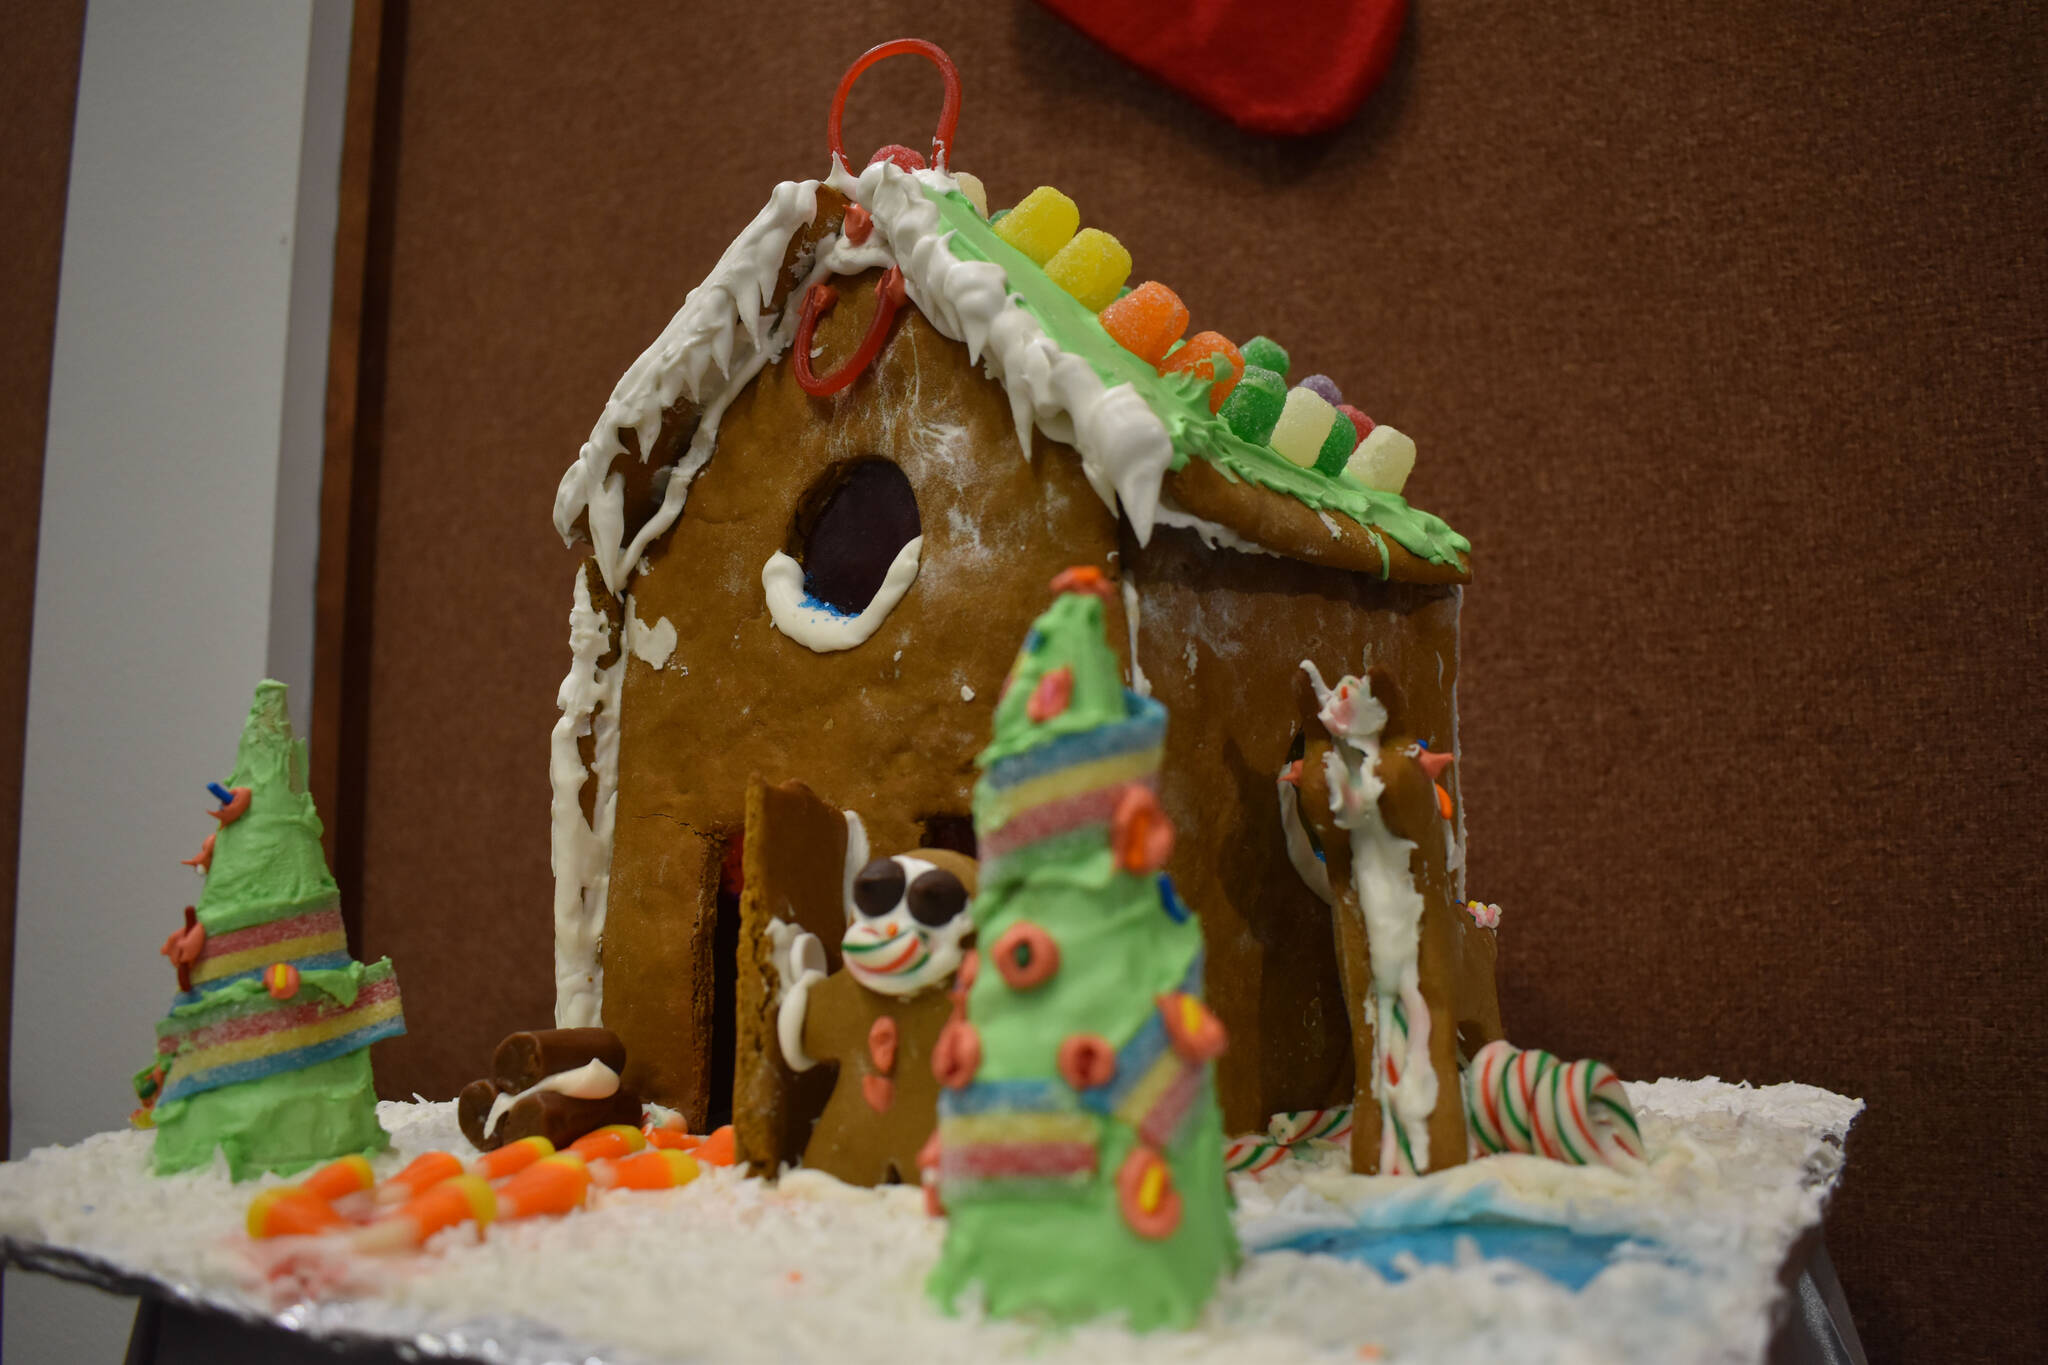 A gingerbread house designed by Evelyn is displayed at the Kenai Chamber of Commerce and Visitor Center on Tuesday, Dec. 6, 2022. (Jake Dye/Peninsula Clarion)